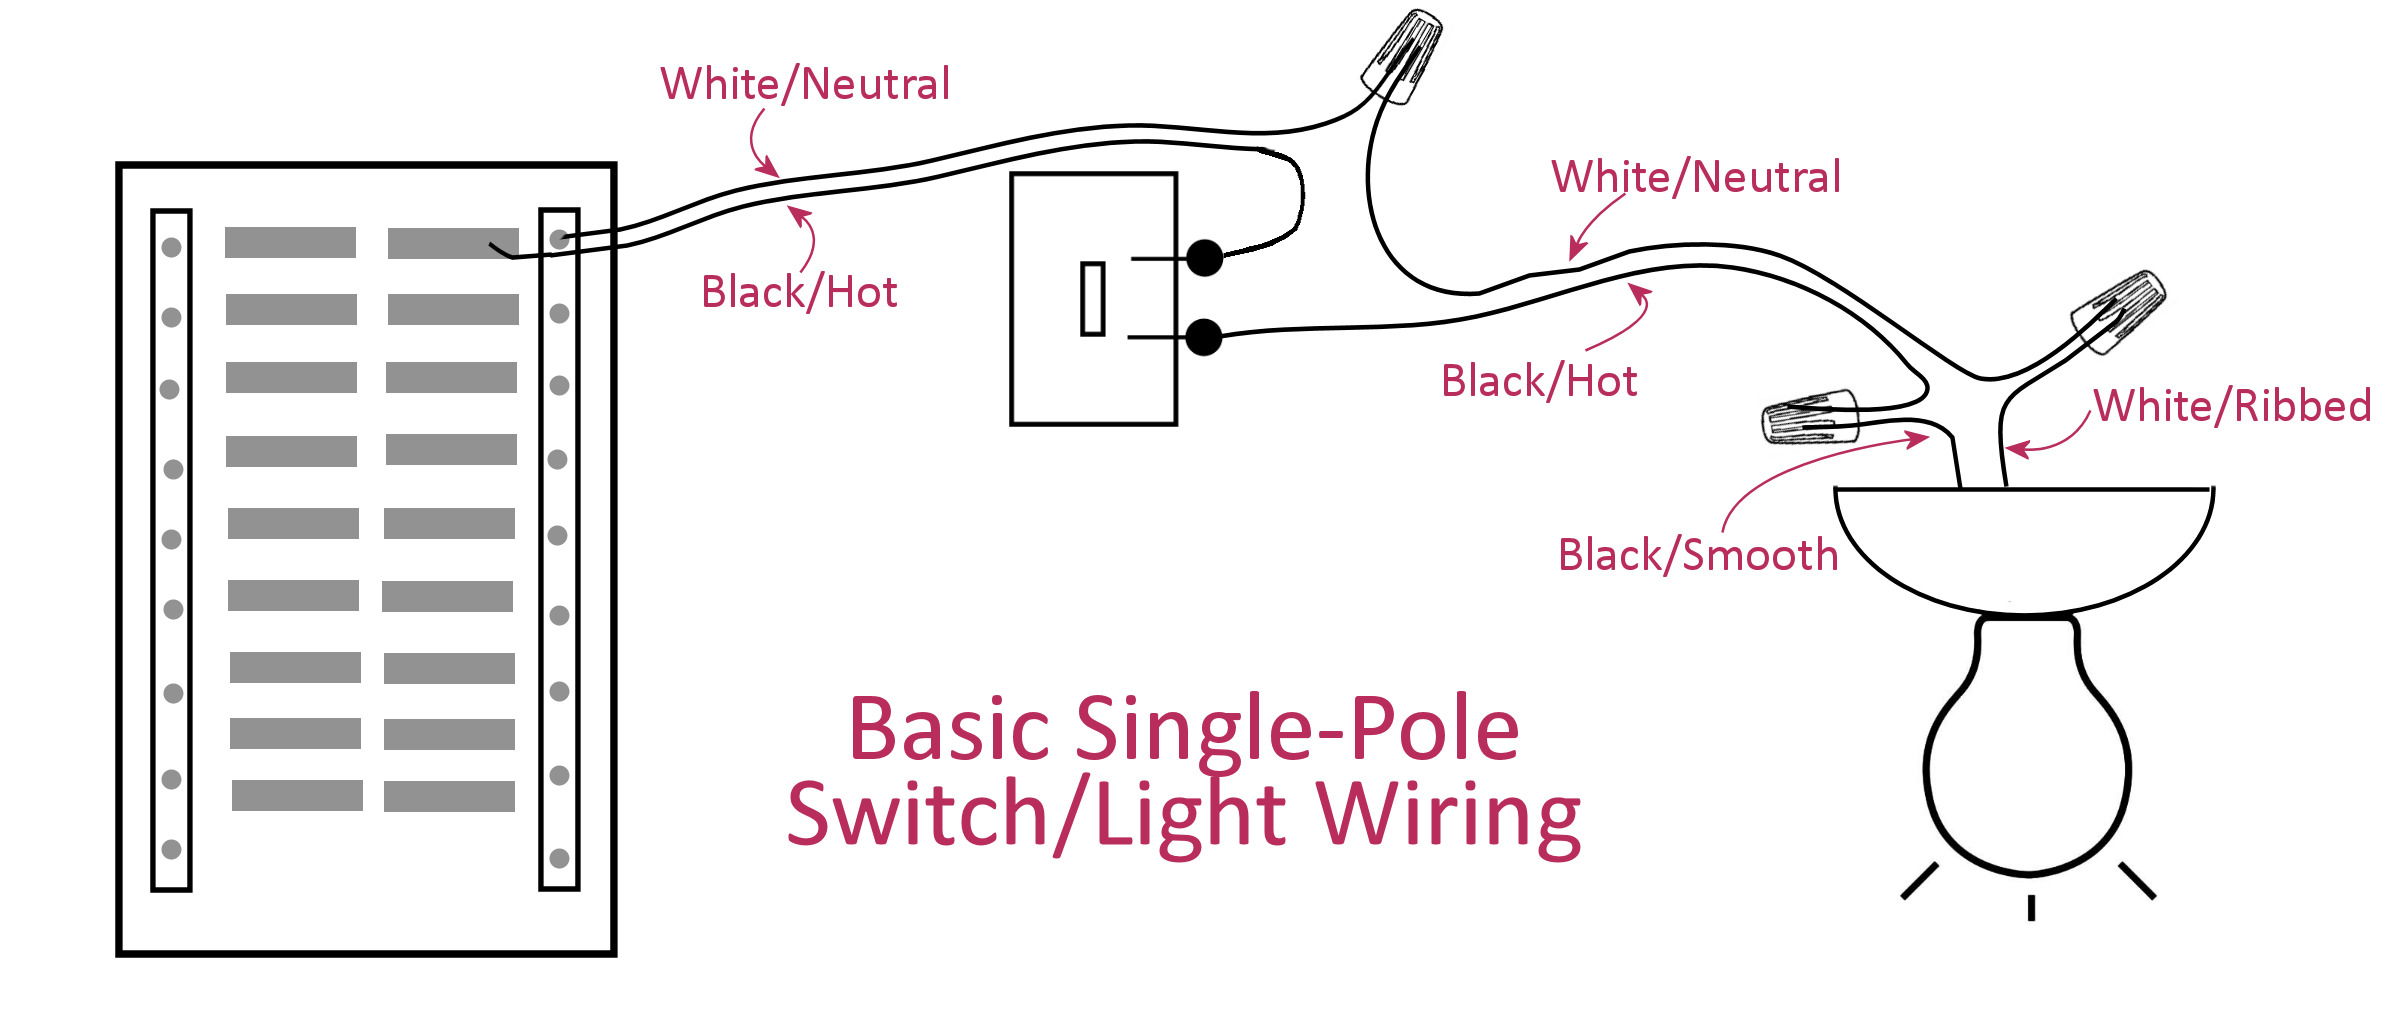 3 Switches One Light Wiring Diagram from www.addicted2decorating.com